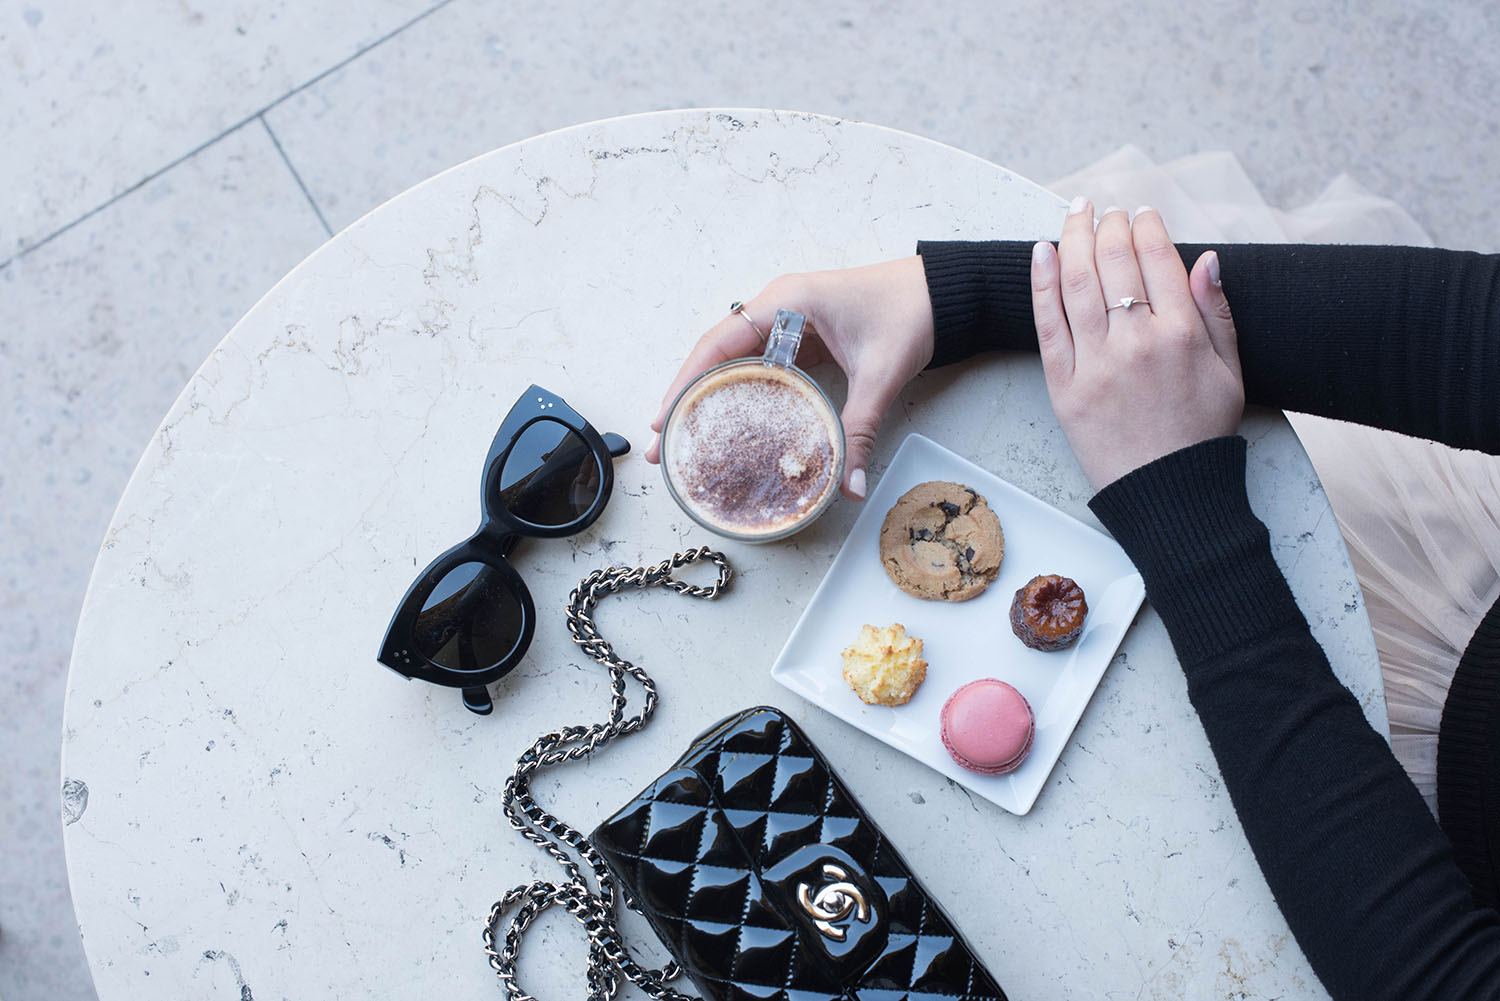 Fashion blogger Cee Fardoe of Coco & Vera enjoys cafe gourmand at the Petit Palais, drinking coffee with her Celine sunglasses and Chanel handbag on the table in front of her